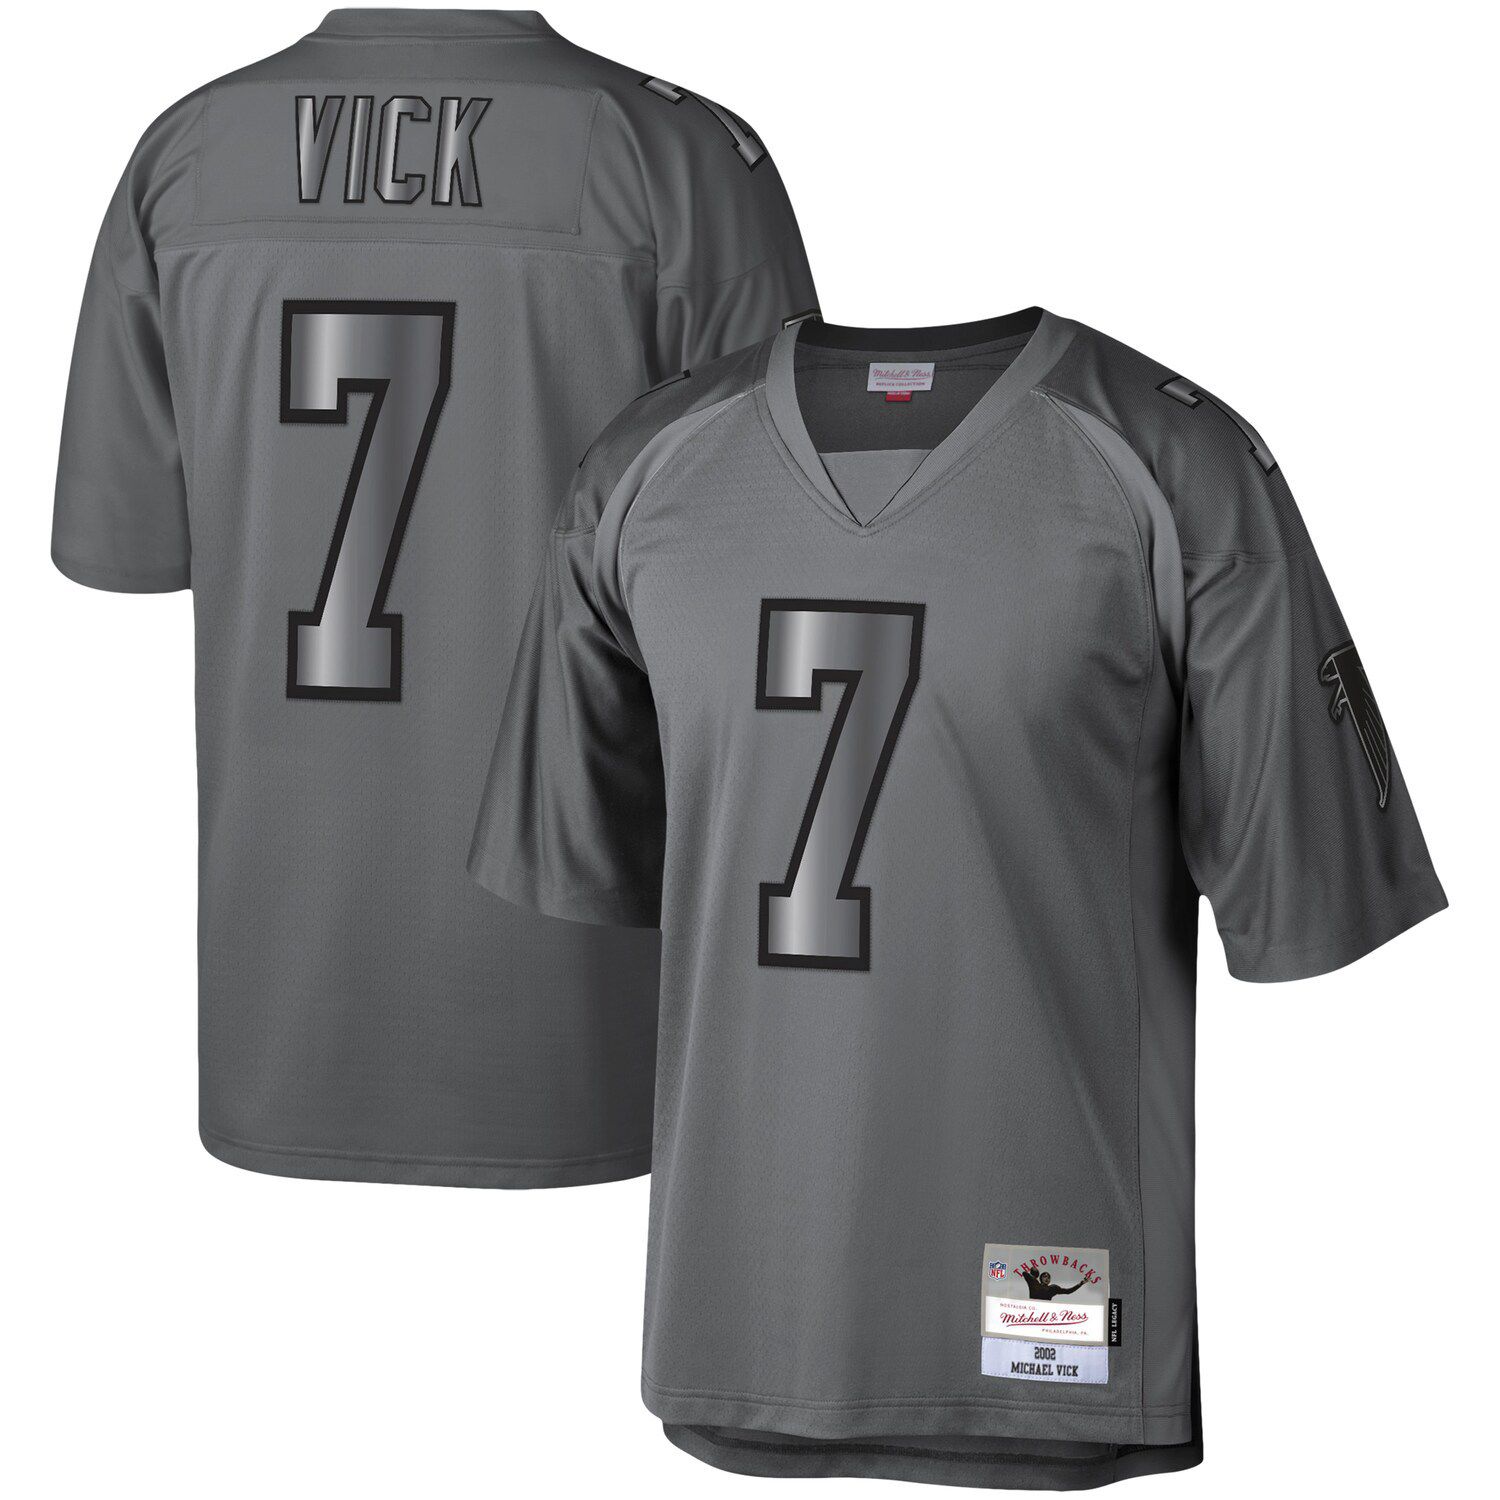 Image for Unbranded Men's Mitchell & Ness Michael Vick Charcoal Atlanta Falcons 2002 Retired Player Metal Legacy Jersey at Kohl's.